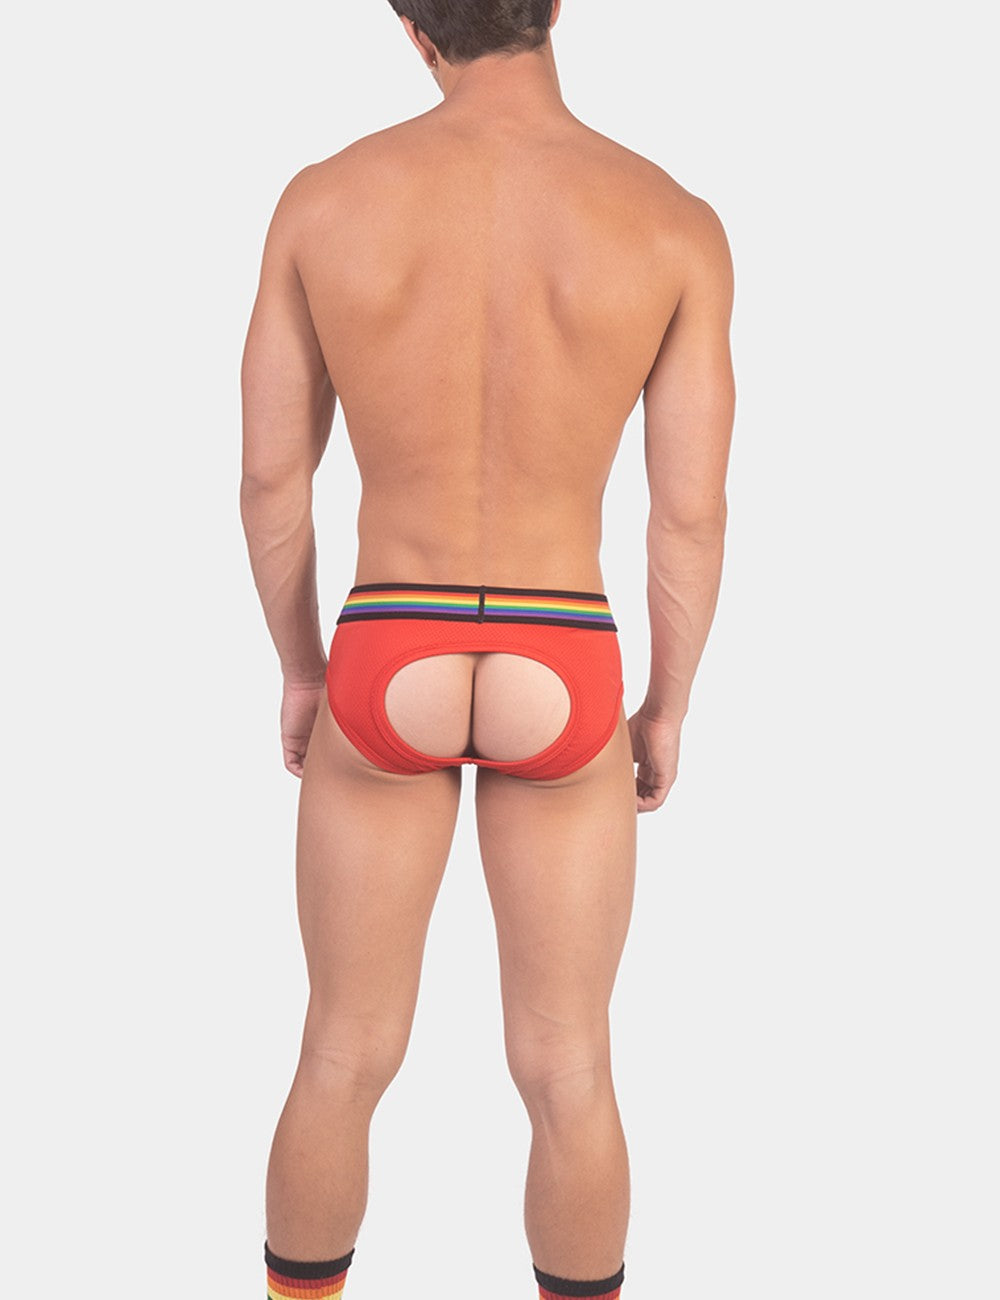 Barcode Berlin: Backless Pride Brief Red